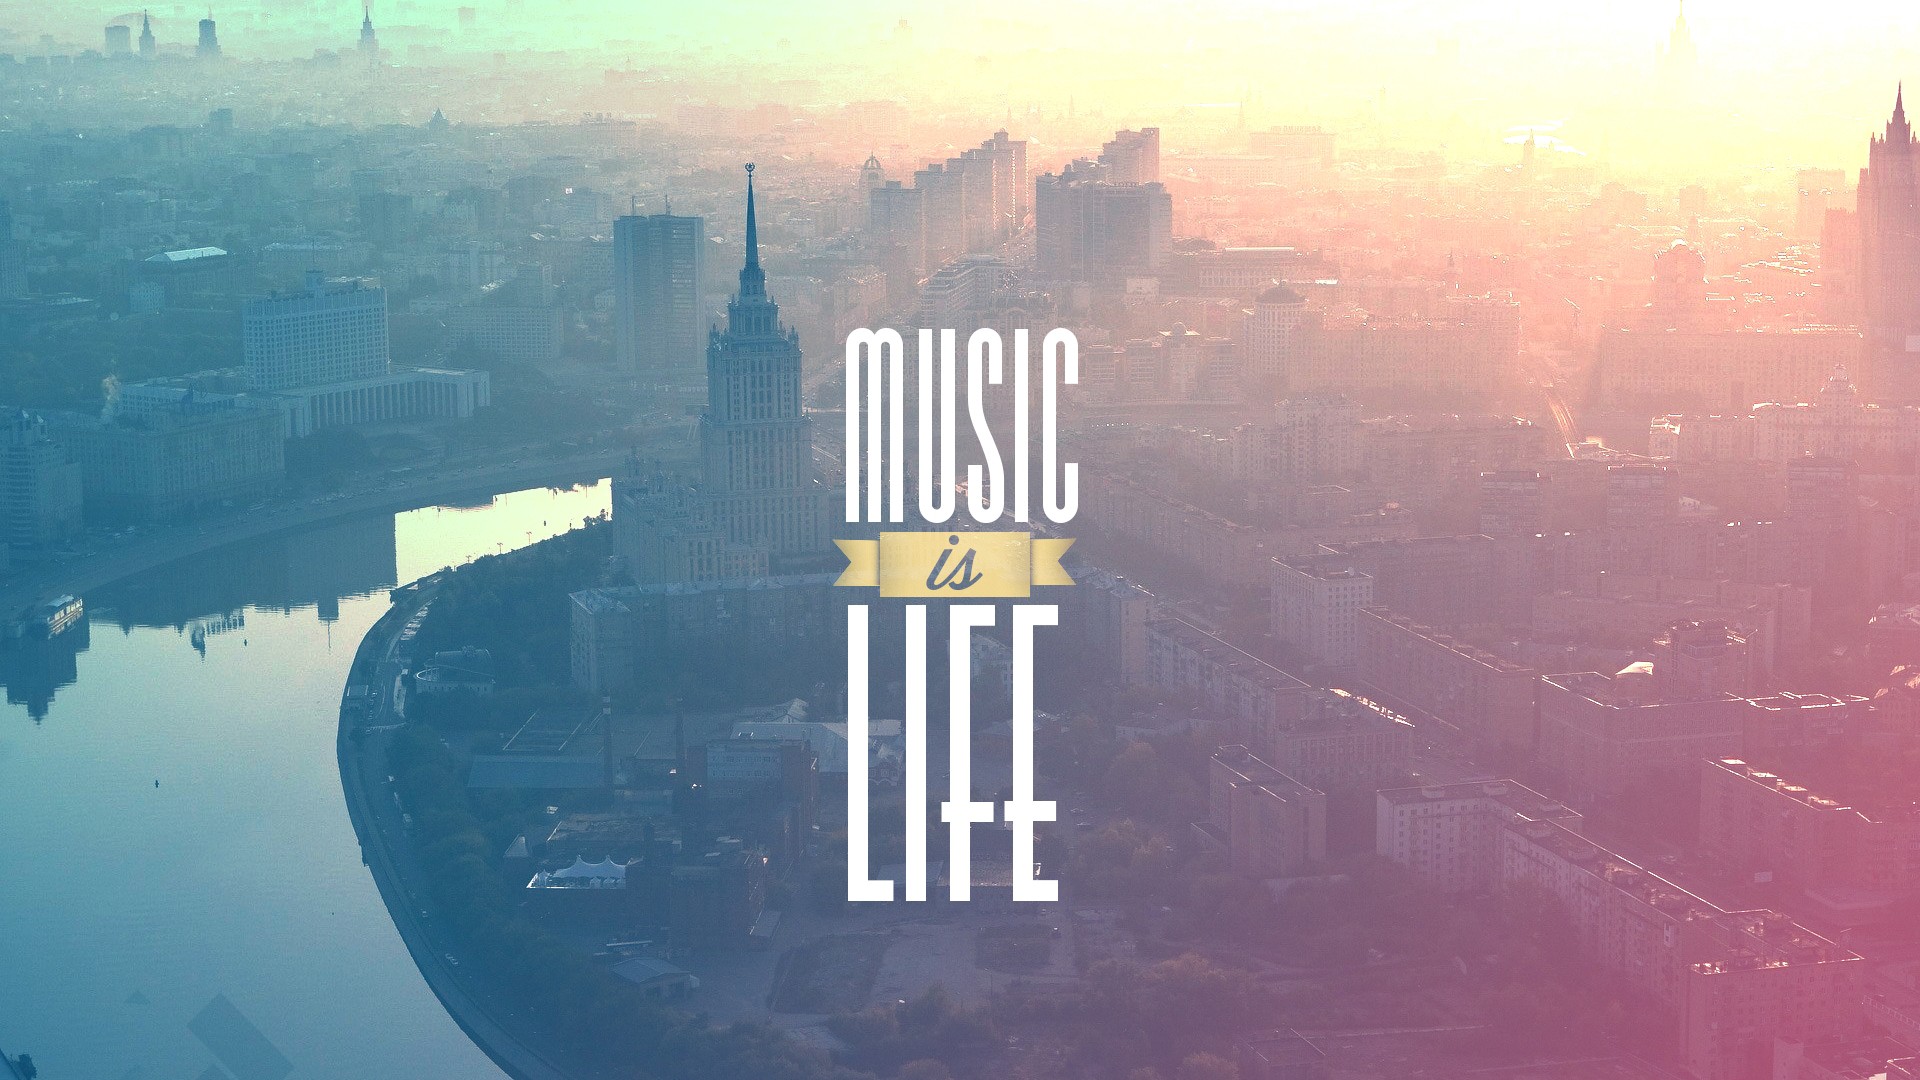 Building, Architecture, Landscape, Music, Typography, Moscow Wallpaper